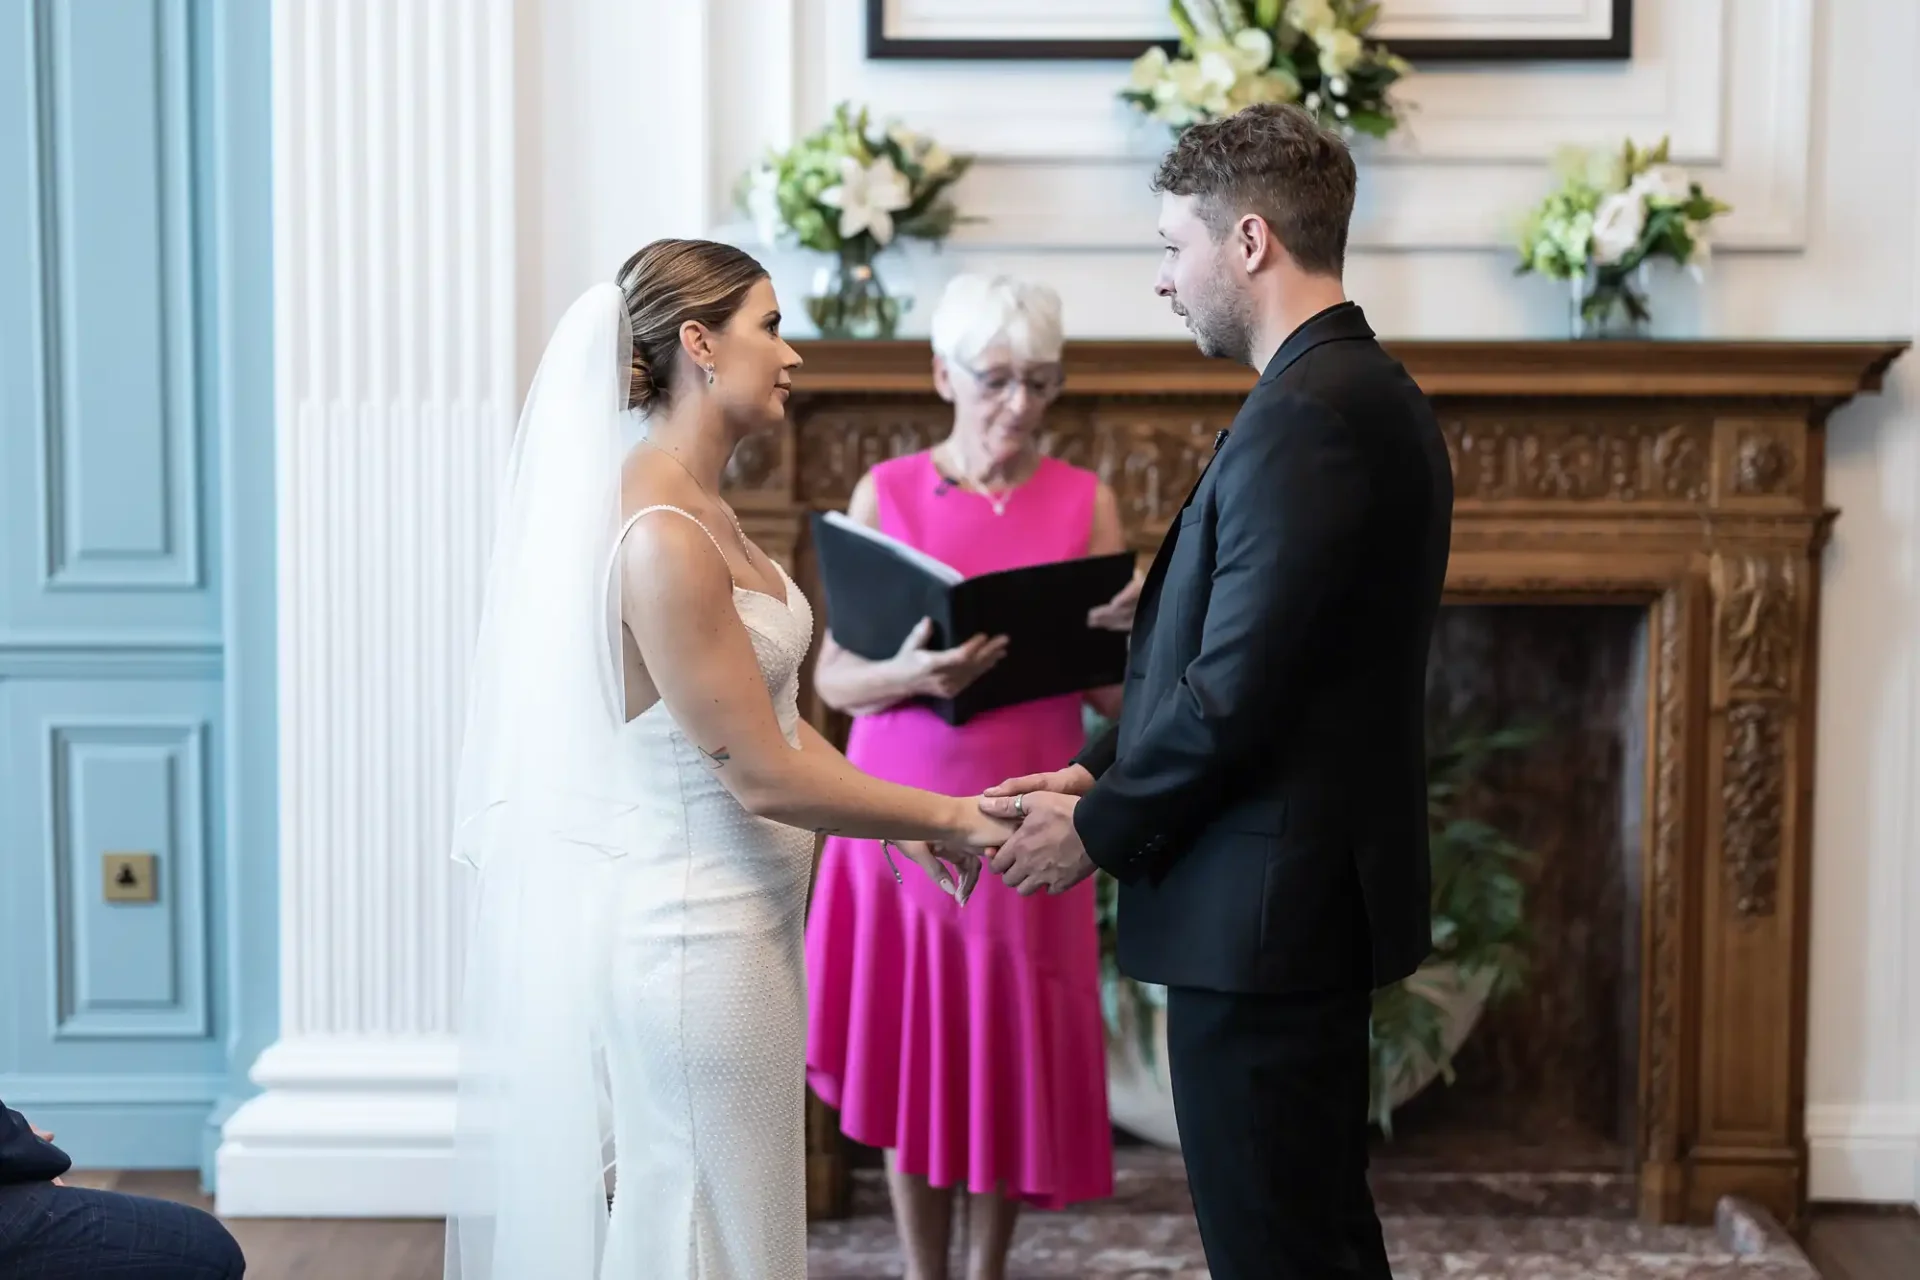 A bride and groom hold hands during their wedding ceremony, with an officiant in pink standing between them in a room with elegant decor.